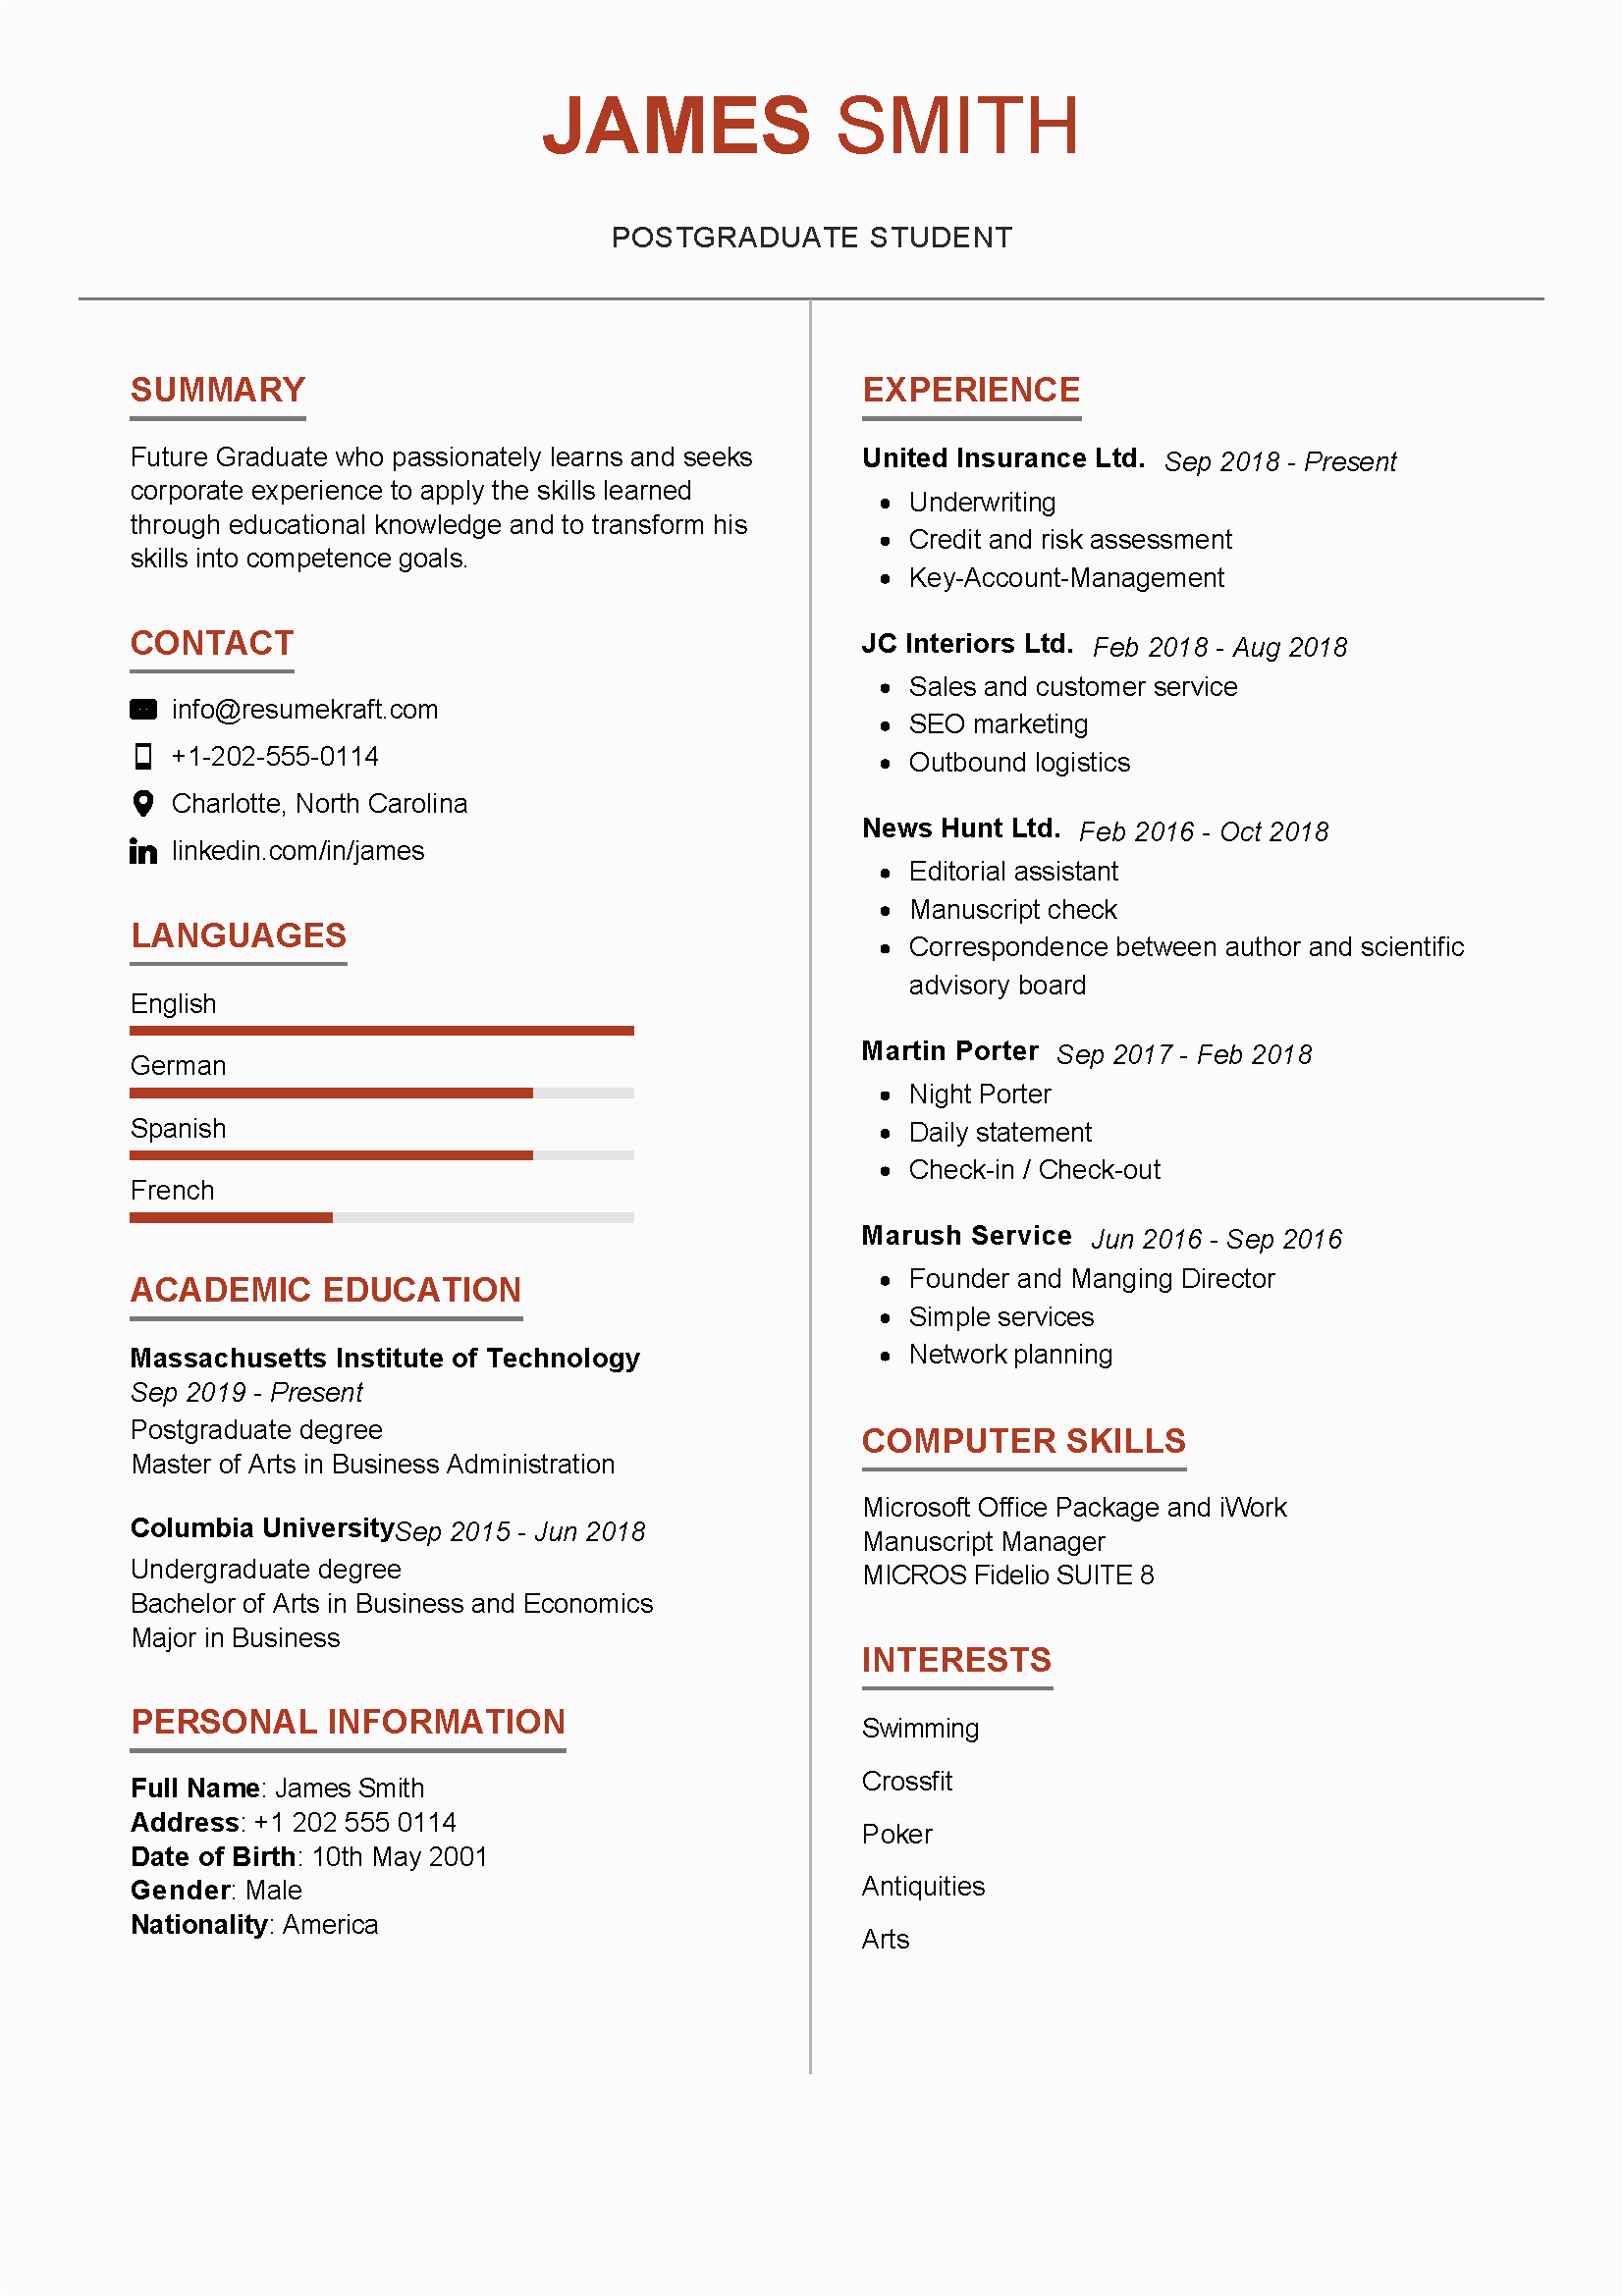 Professional Resume Template for College Students Graduate Student Resume Sample